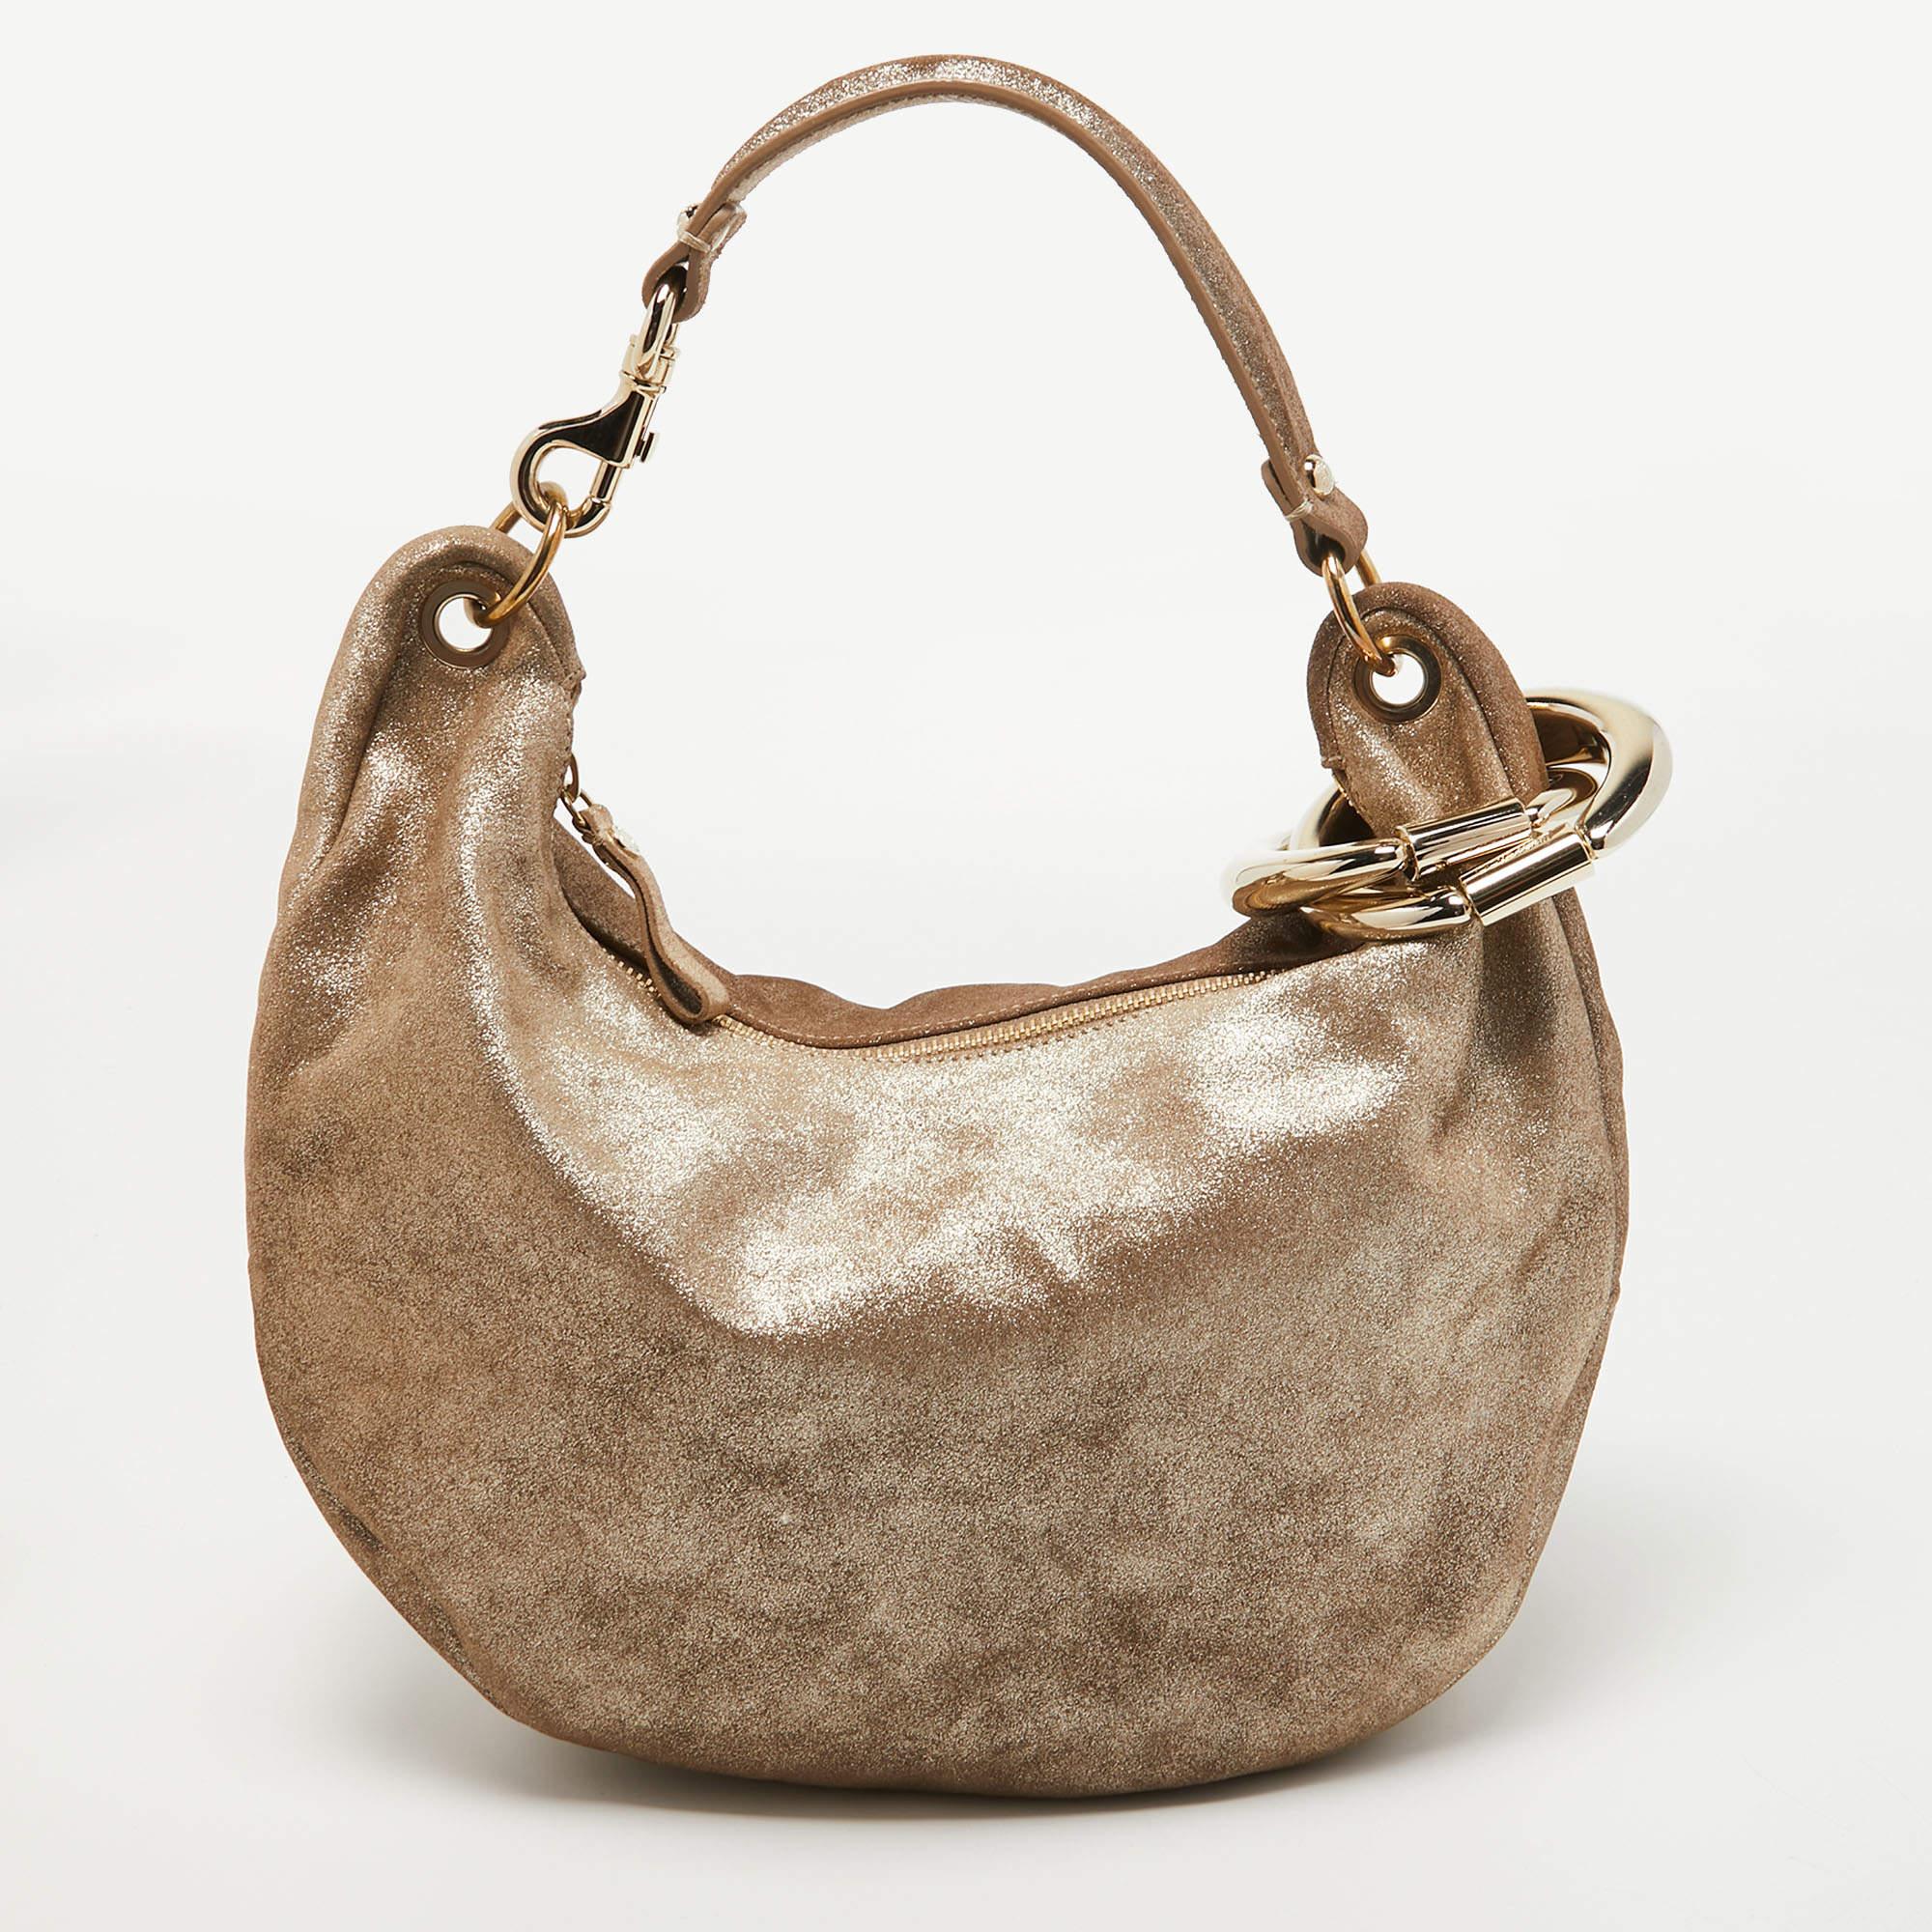 This stylish bag from Jimmy Choo has been crafted from suede. The top opens to a capacious interior that can easily hold your everyday essentials. The bag is finished with gold-tone hardware and a single handle.

Includes: Original Dustbag,